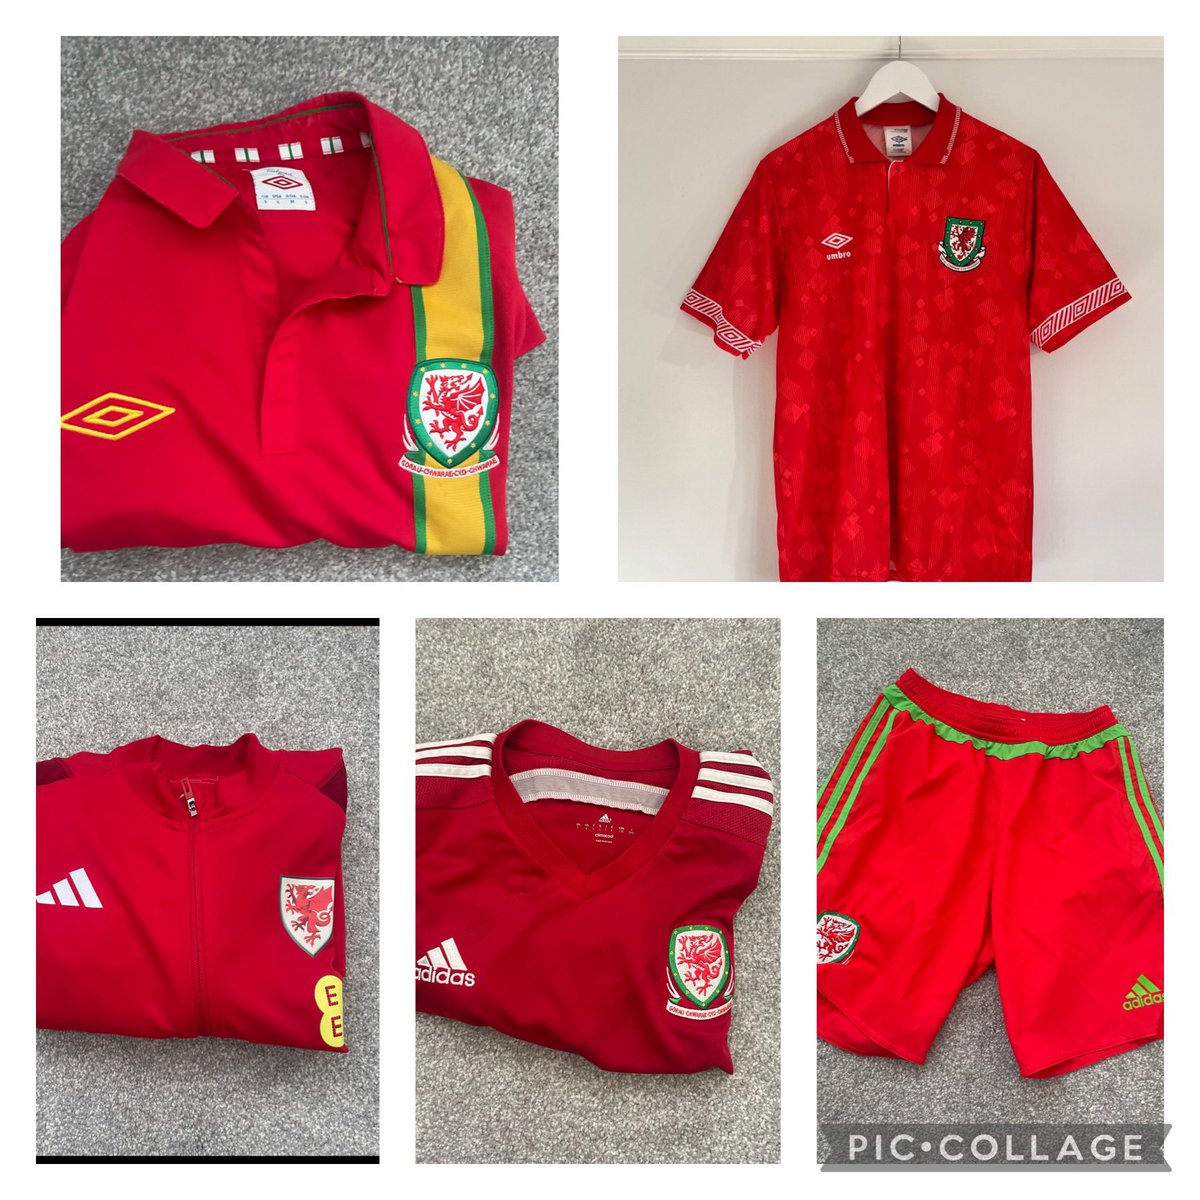 Home 2012 Small LS £60 Home 1990 large £125 XL Zipped jacket £20 Home 2014 Large £25 2015 Shorts Small £8